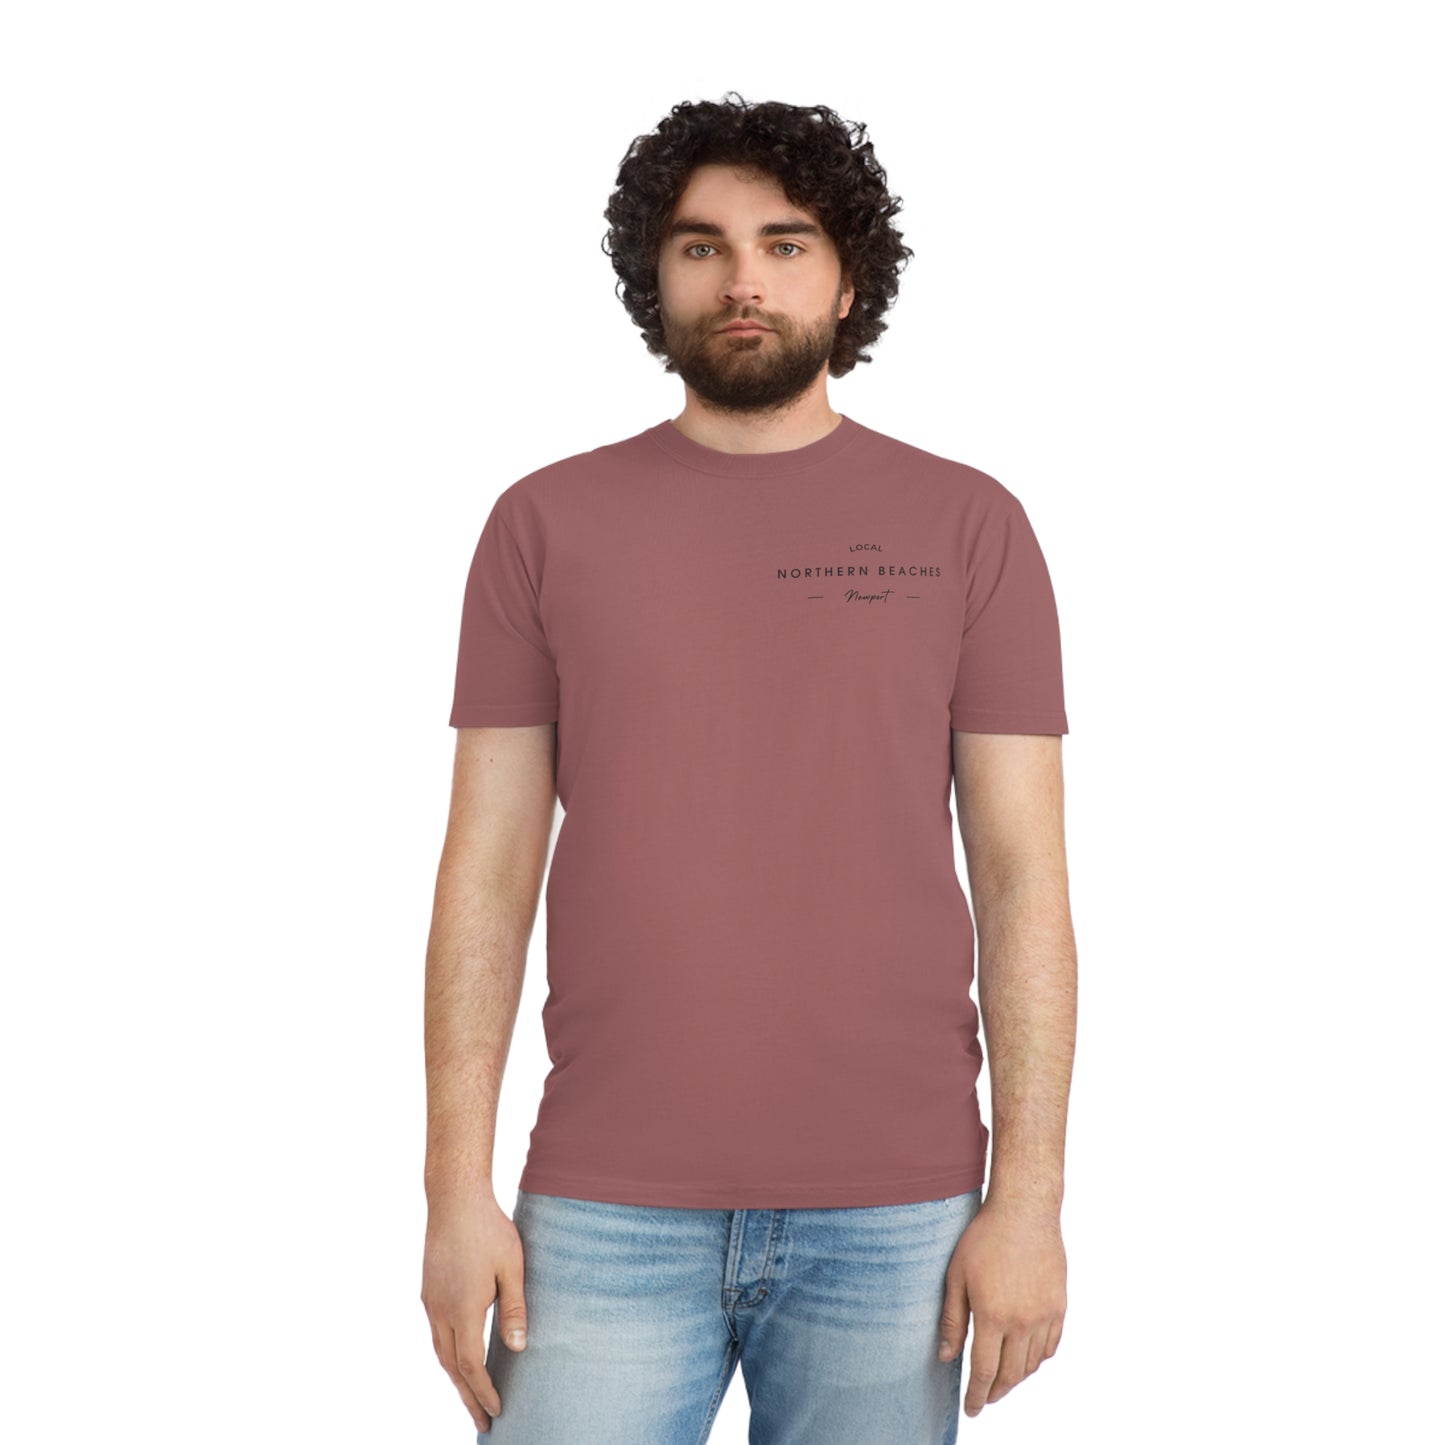 Northern Beaches Newport AS Colour 100% Cotton Unisex Faded Shirt